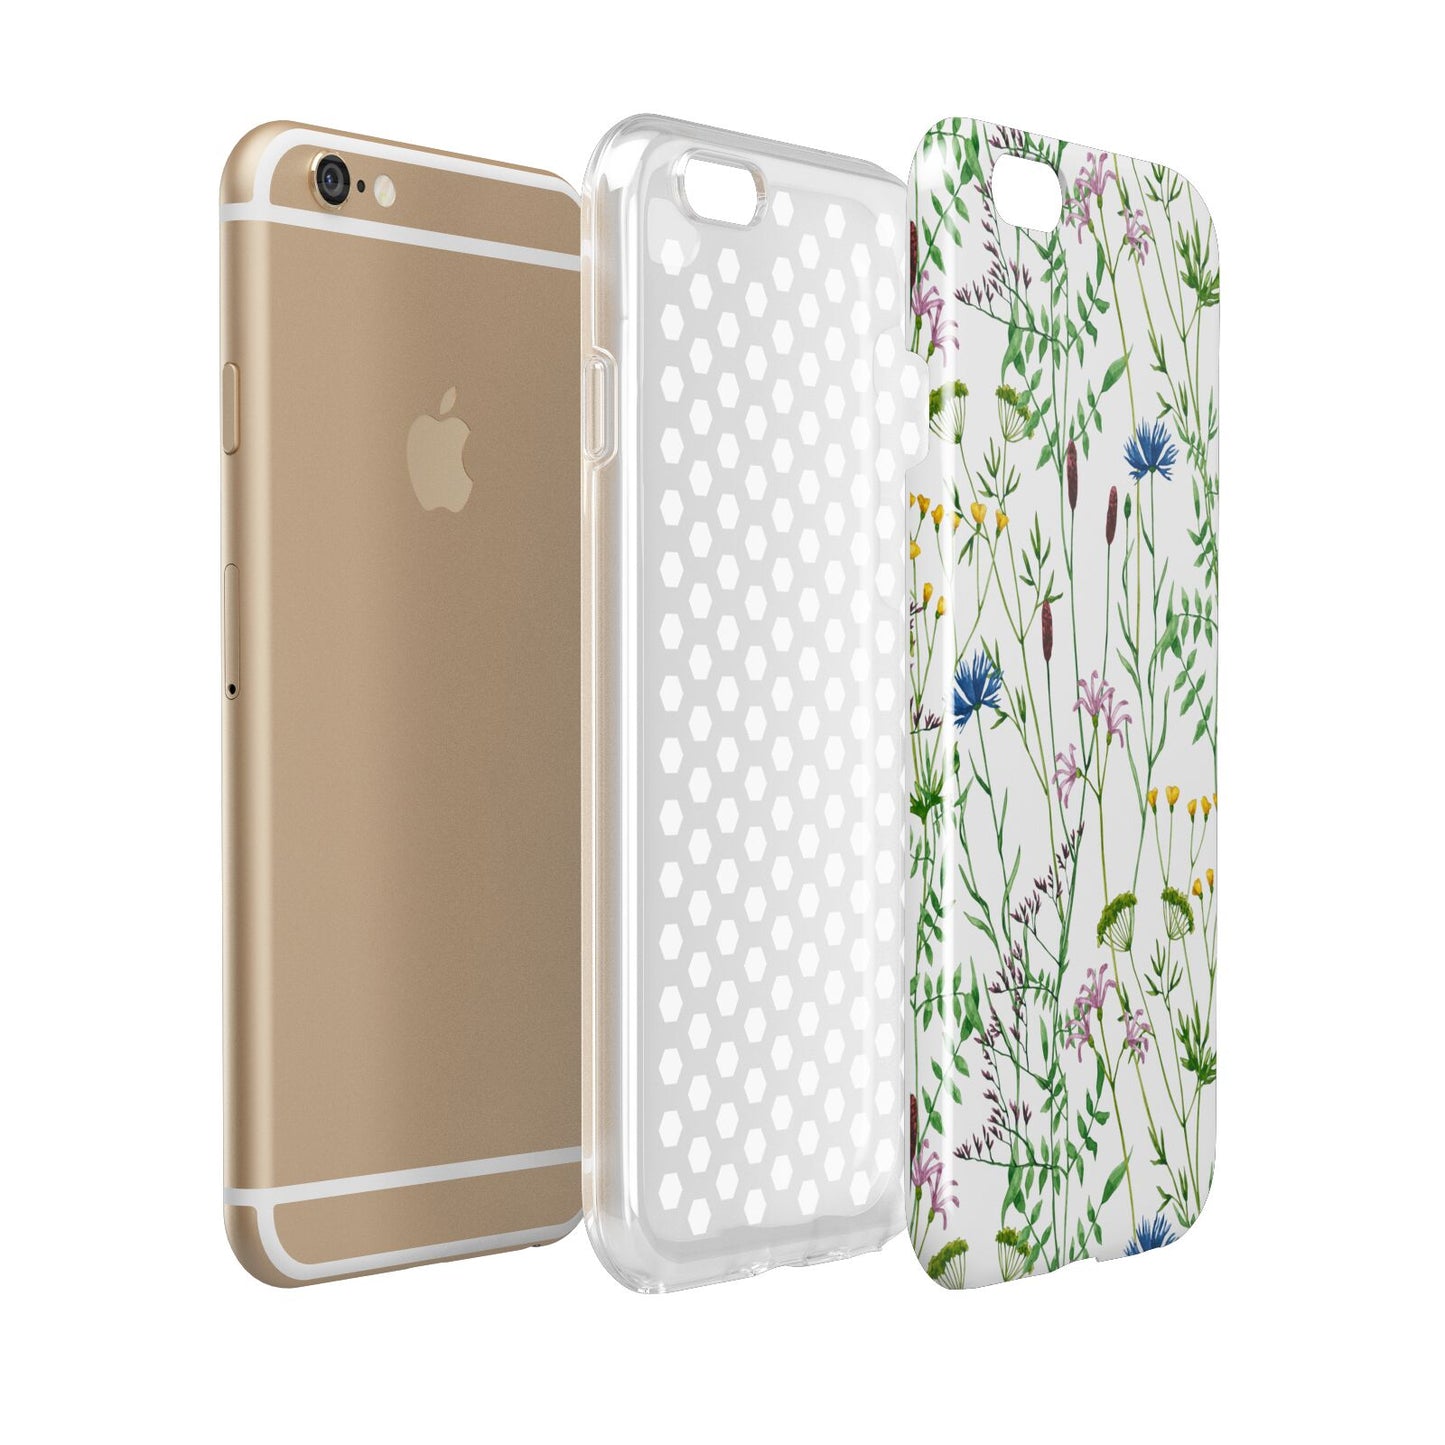 Wildflowers Apple iPhone 6 3D Tough Case Expanded view